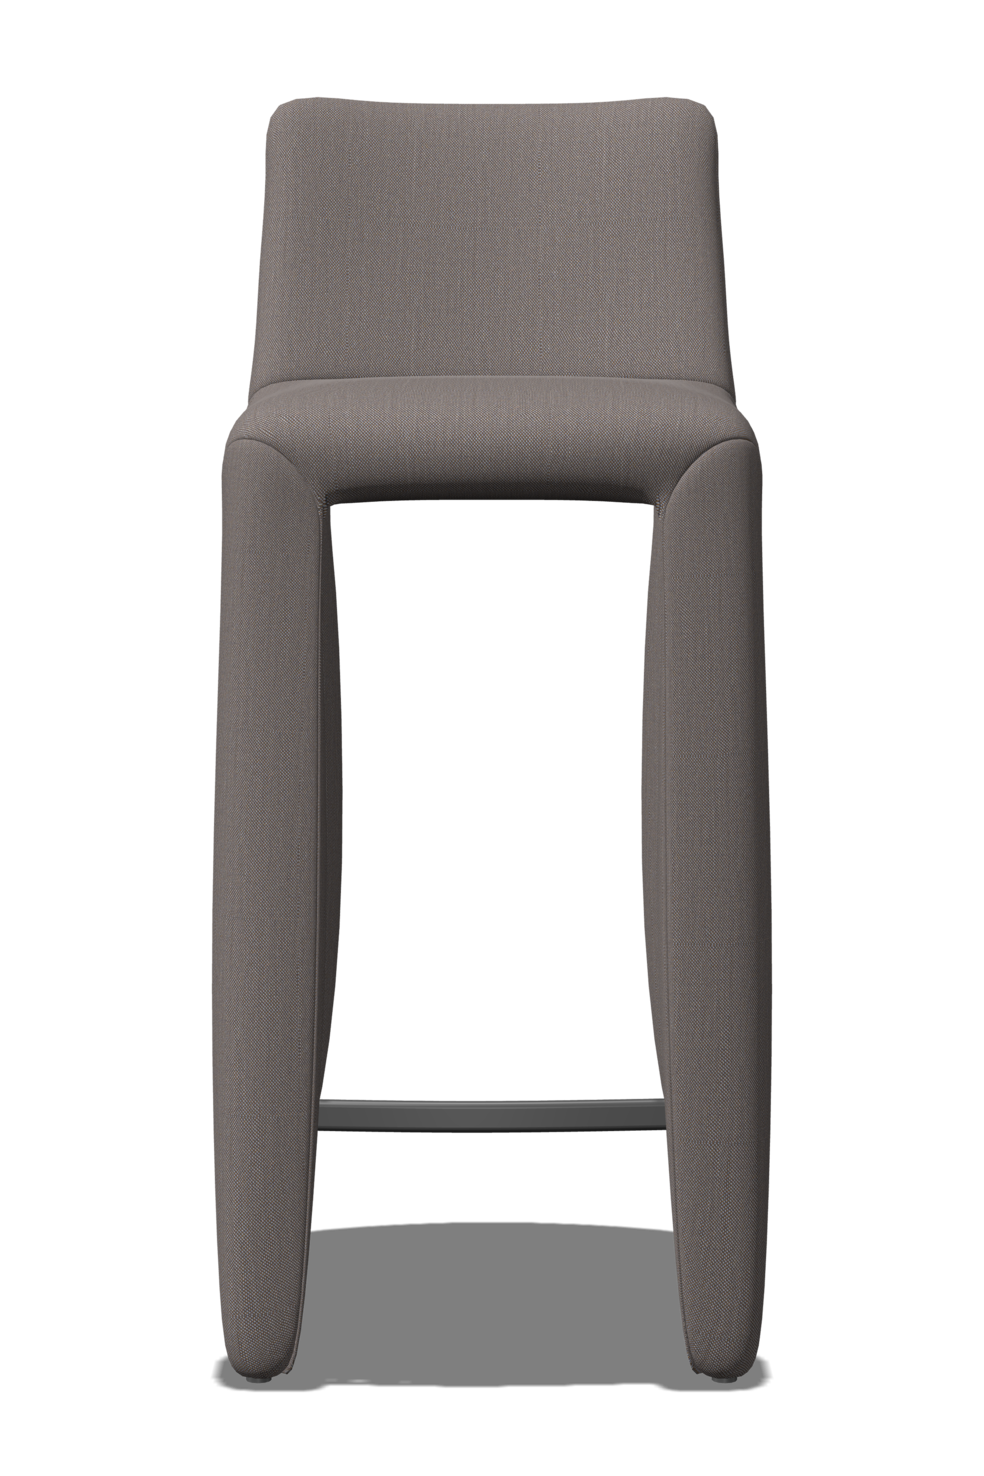 Monster Barstool high no stitching multicolour